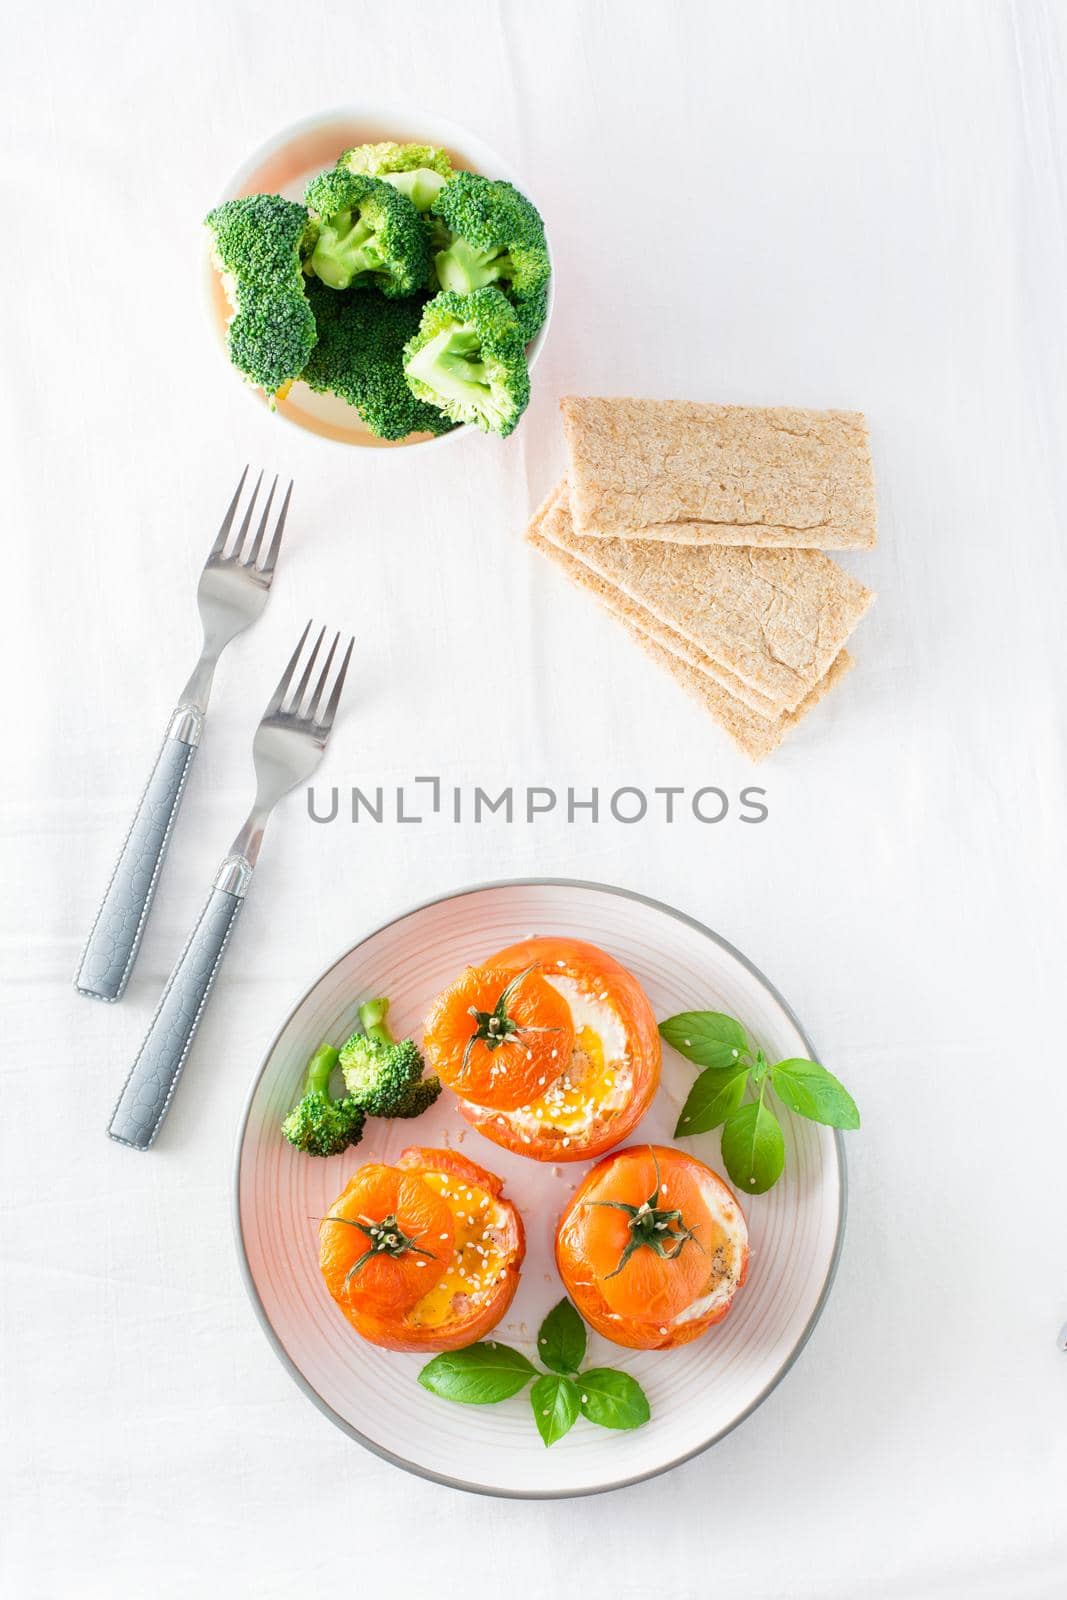 Baked tomatoes with egg, broccoli and basil leaves on a plate. Diet lunch. Top view. Vertical view by Aleruana